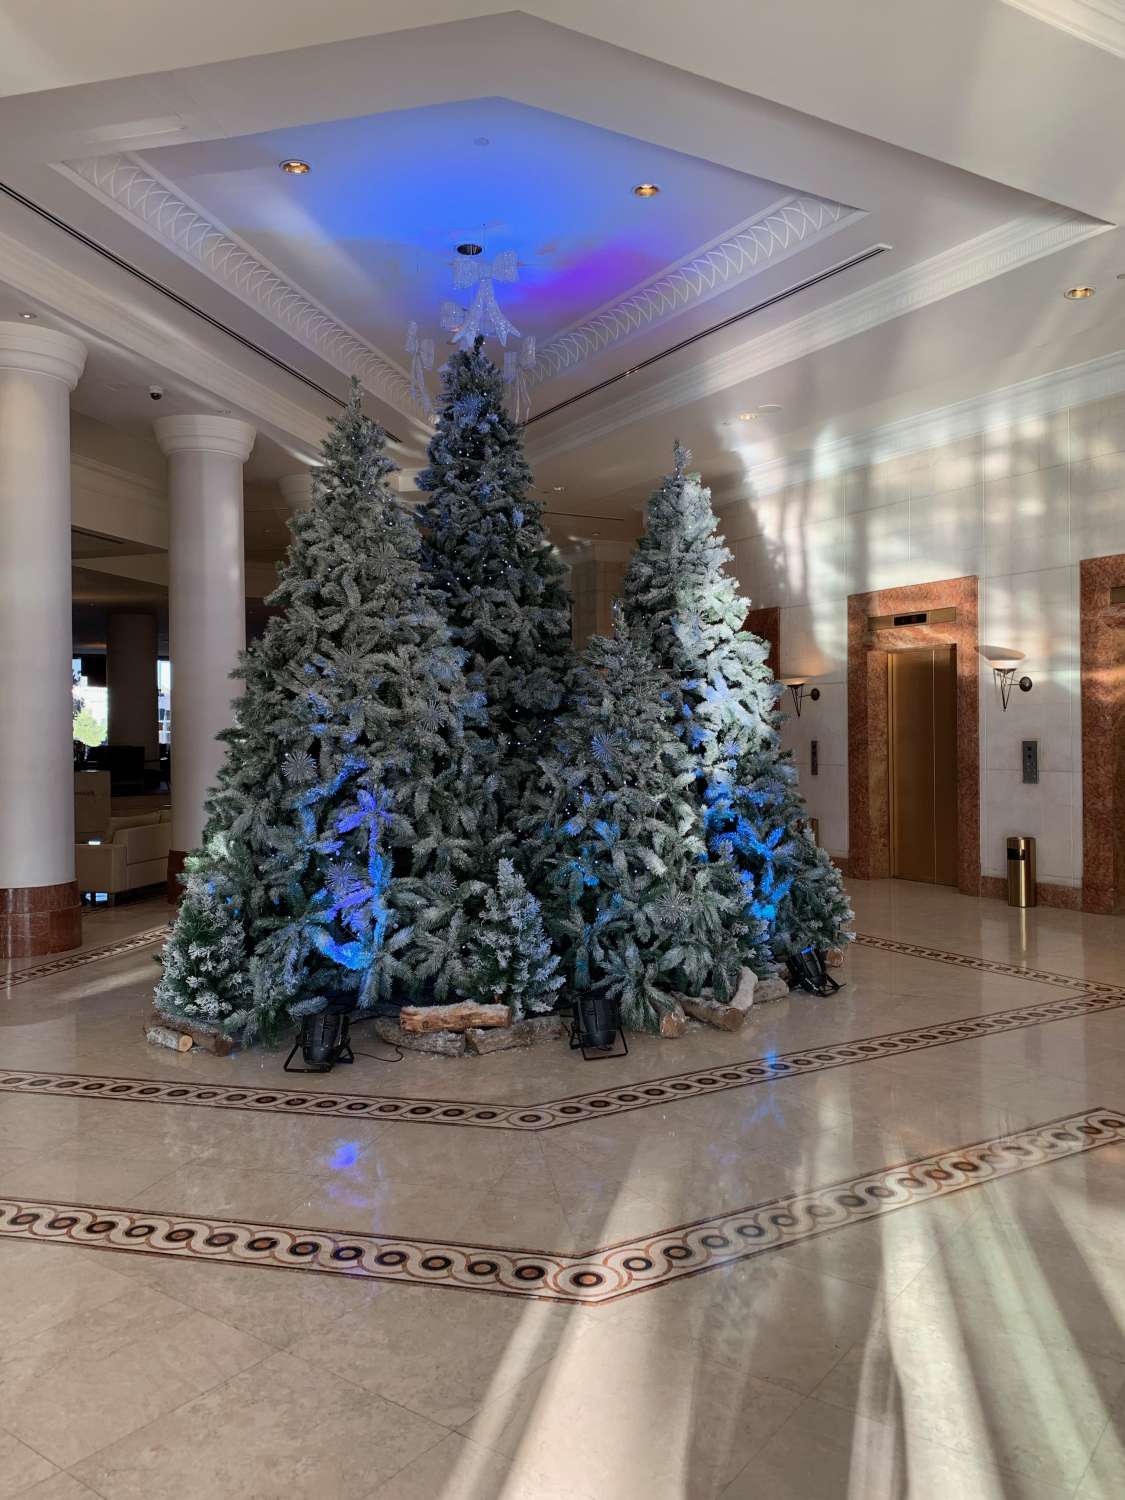 Interior view of the lobby with holiday decorations